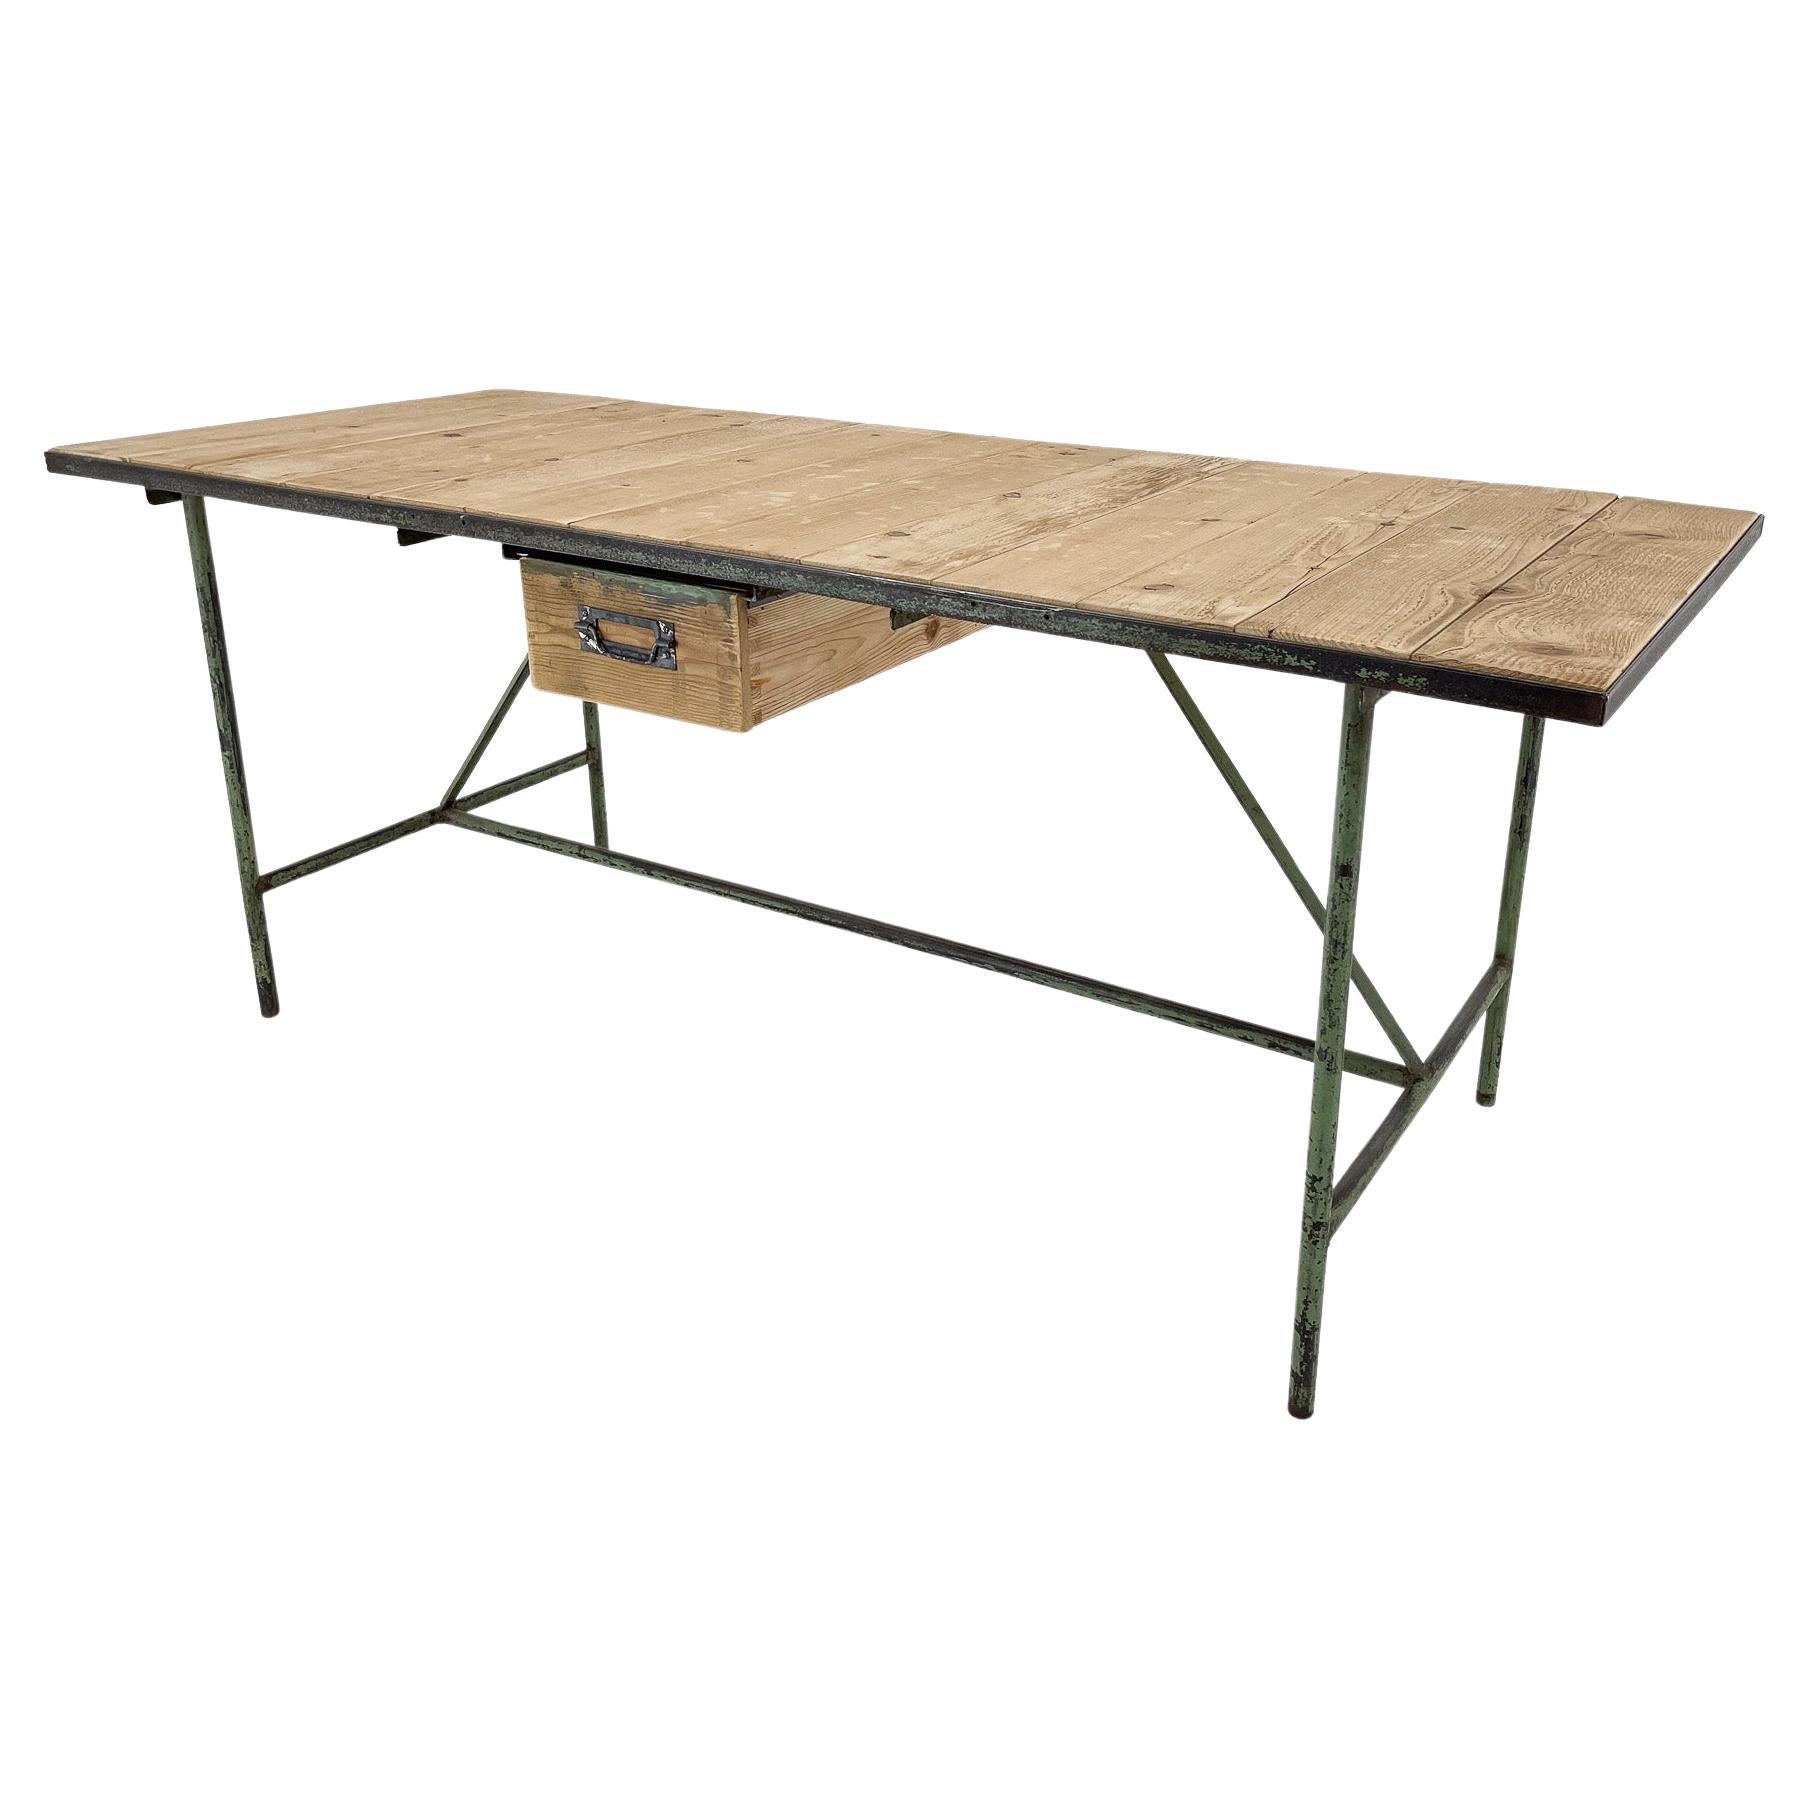 Vintage Industrial Iron & Wood Table with Drawer